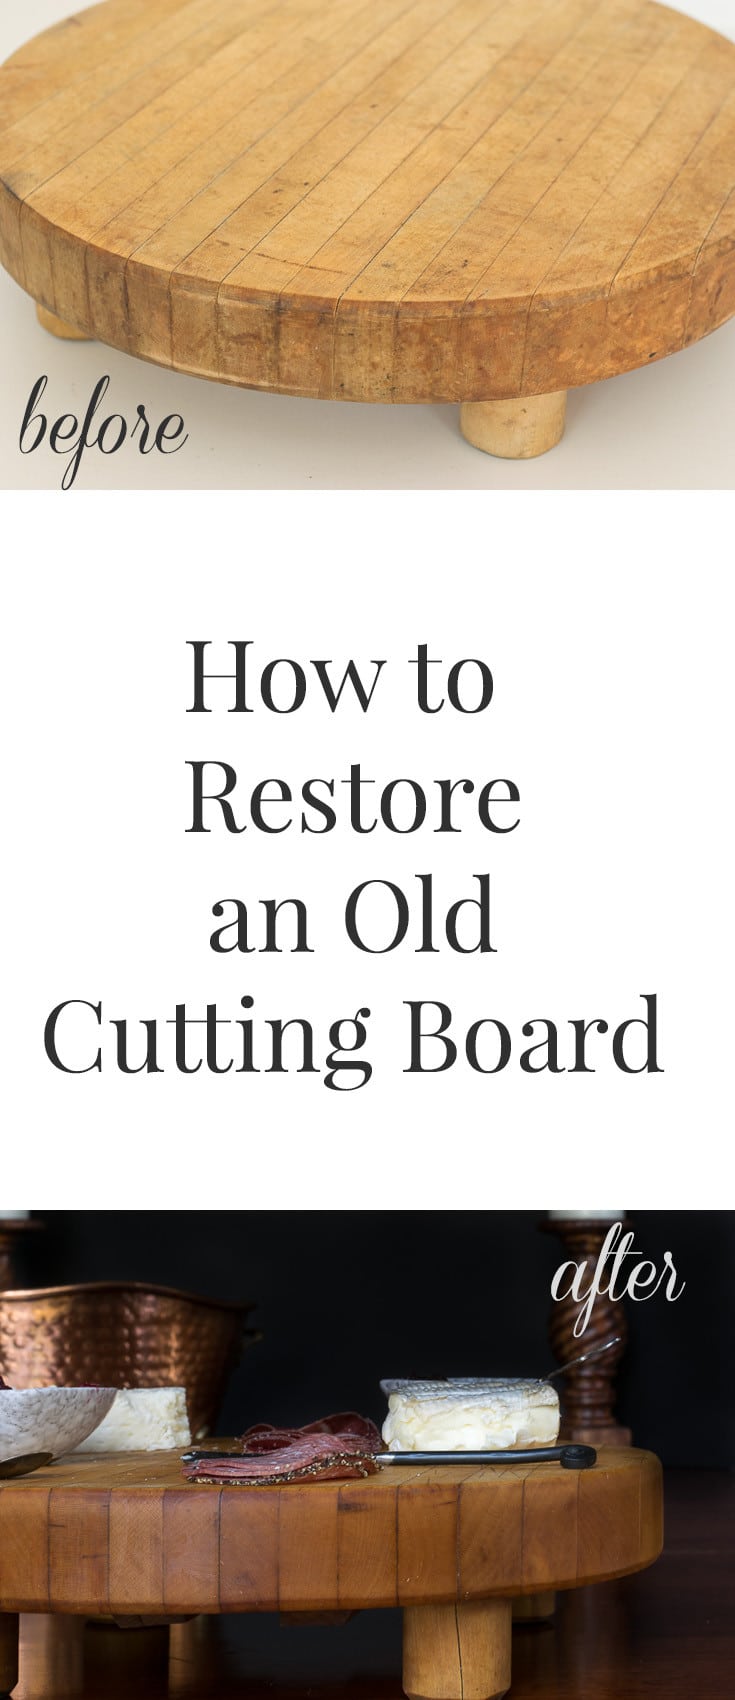 How to Clean and Restore Vintage Cutting Boards